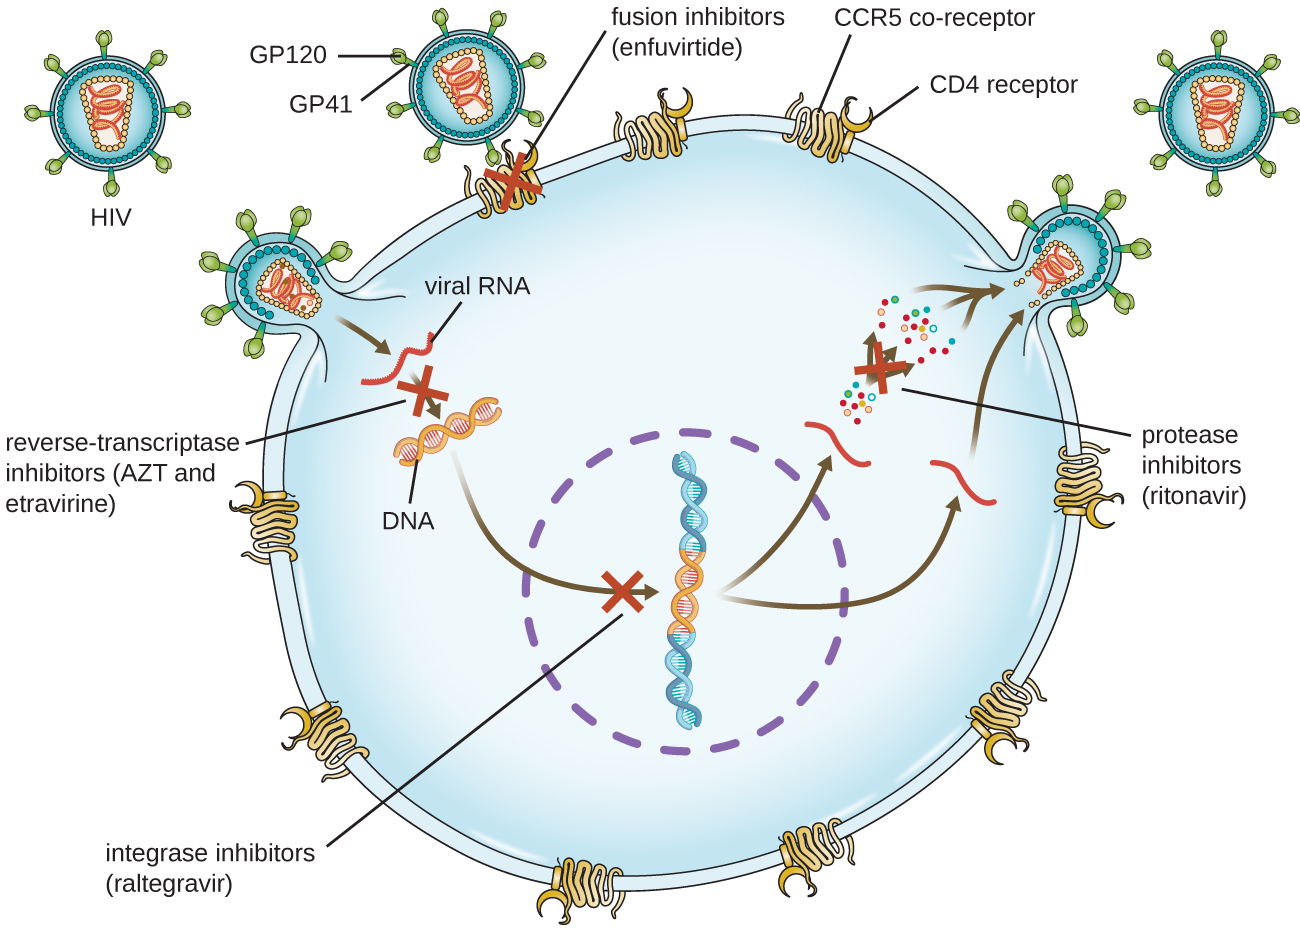 Diagram showing HIV infection and locations where drugs can stop the infection. GP120 and G(42 are proteins that are on the surface of the virus and bind to CD4 receptor and CCR5. Enfuvirtide is a fusion inhibitor that blocks this process. When the virus enters, it produces DNA from RNA, this  can be blocked by AZT and etravirine which are reverse-transcriptase inhibitors. Next, the viral DNA integrates into the host DNA. Raltegravir is an integrase inhibitor and blocks this step. Finally the virus is rebuild. Ritonavir is a protease inhibitor and blocks this step.